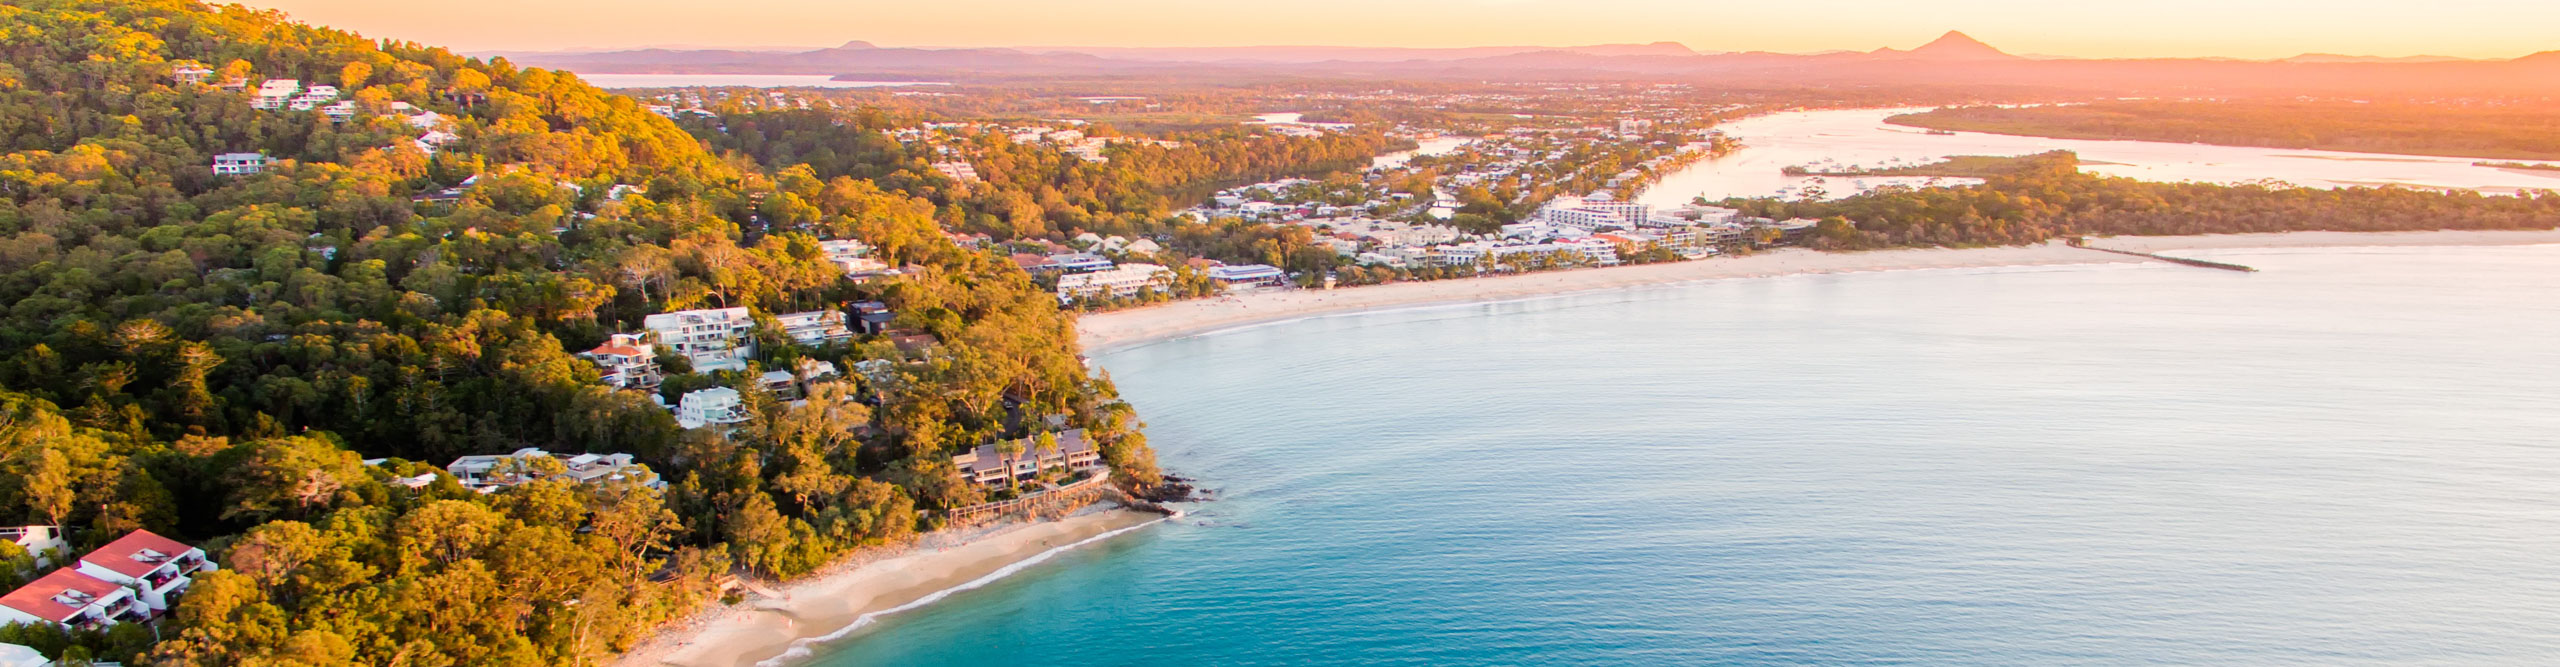 An aerial view of Noosa National Park and beach at sunset in Queensland Australia